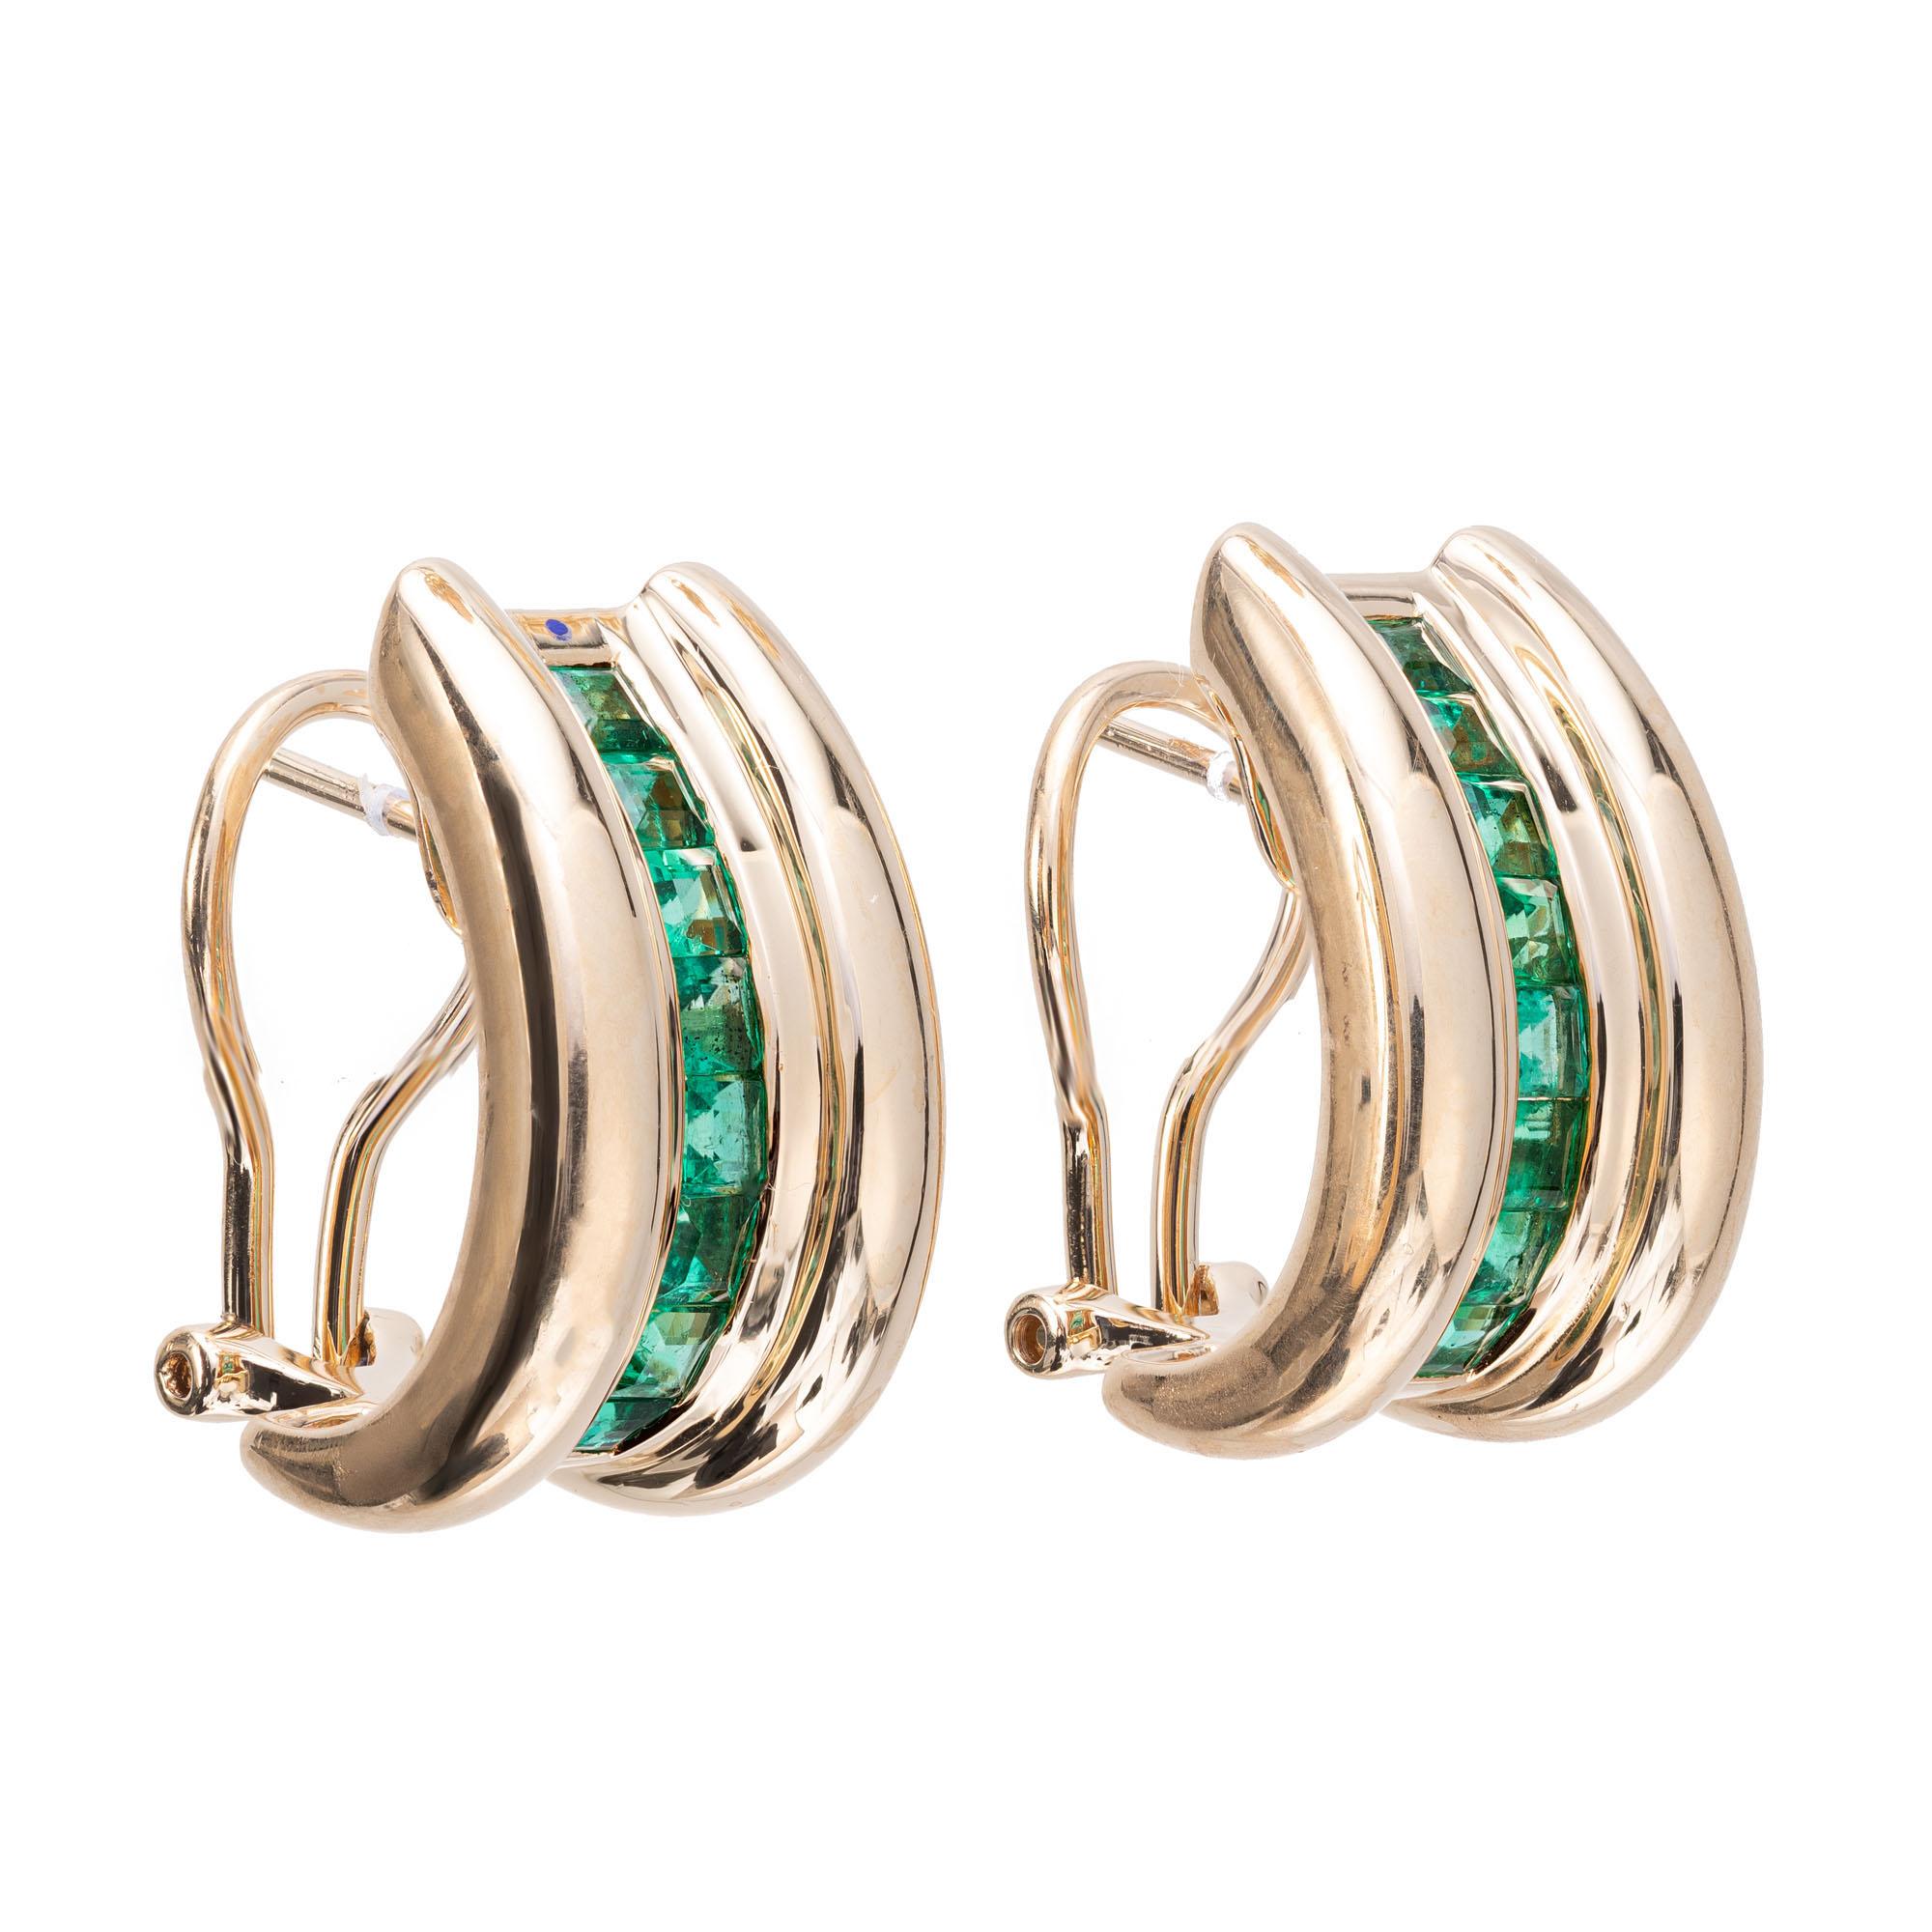 14k yellow gold clip post hoop earrings with 2.00 carats of bright green GIA certified 16 natural square cut emeralds.

16 square cut green emeralds, MI approx. 2.00cts GIA Certificate # 5212380773
14k yellow gold 
Stamped: 14k
Hallmark: CEI